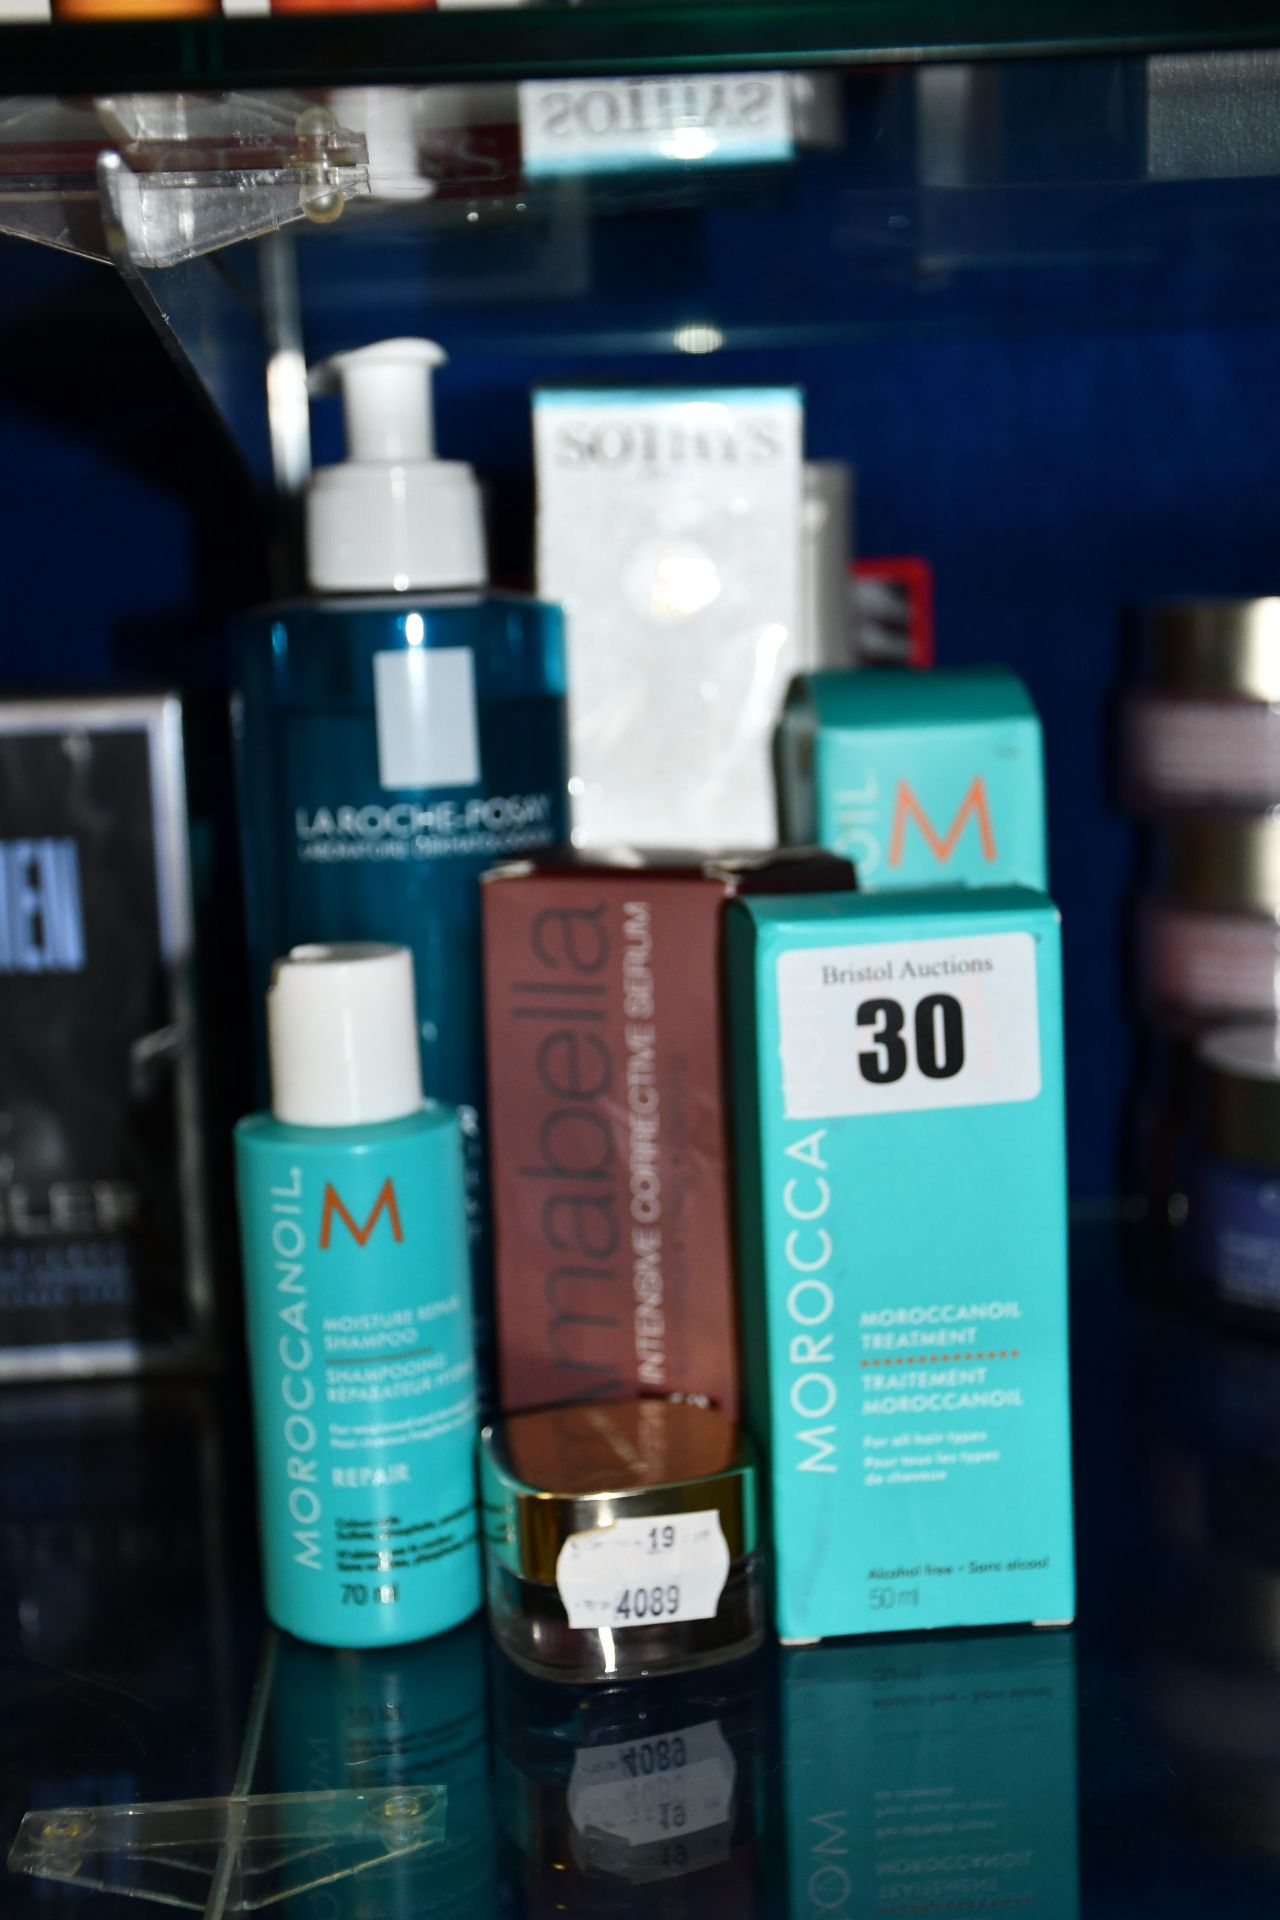 Ten as new toiletries/skin care items to include Sothys Paris, Decleor, La Roche-Posay, Laura